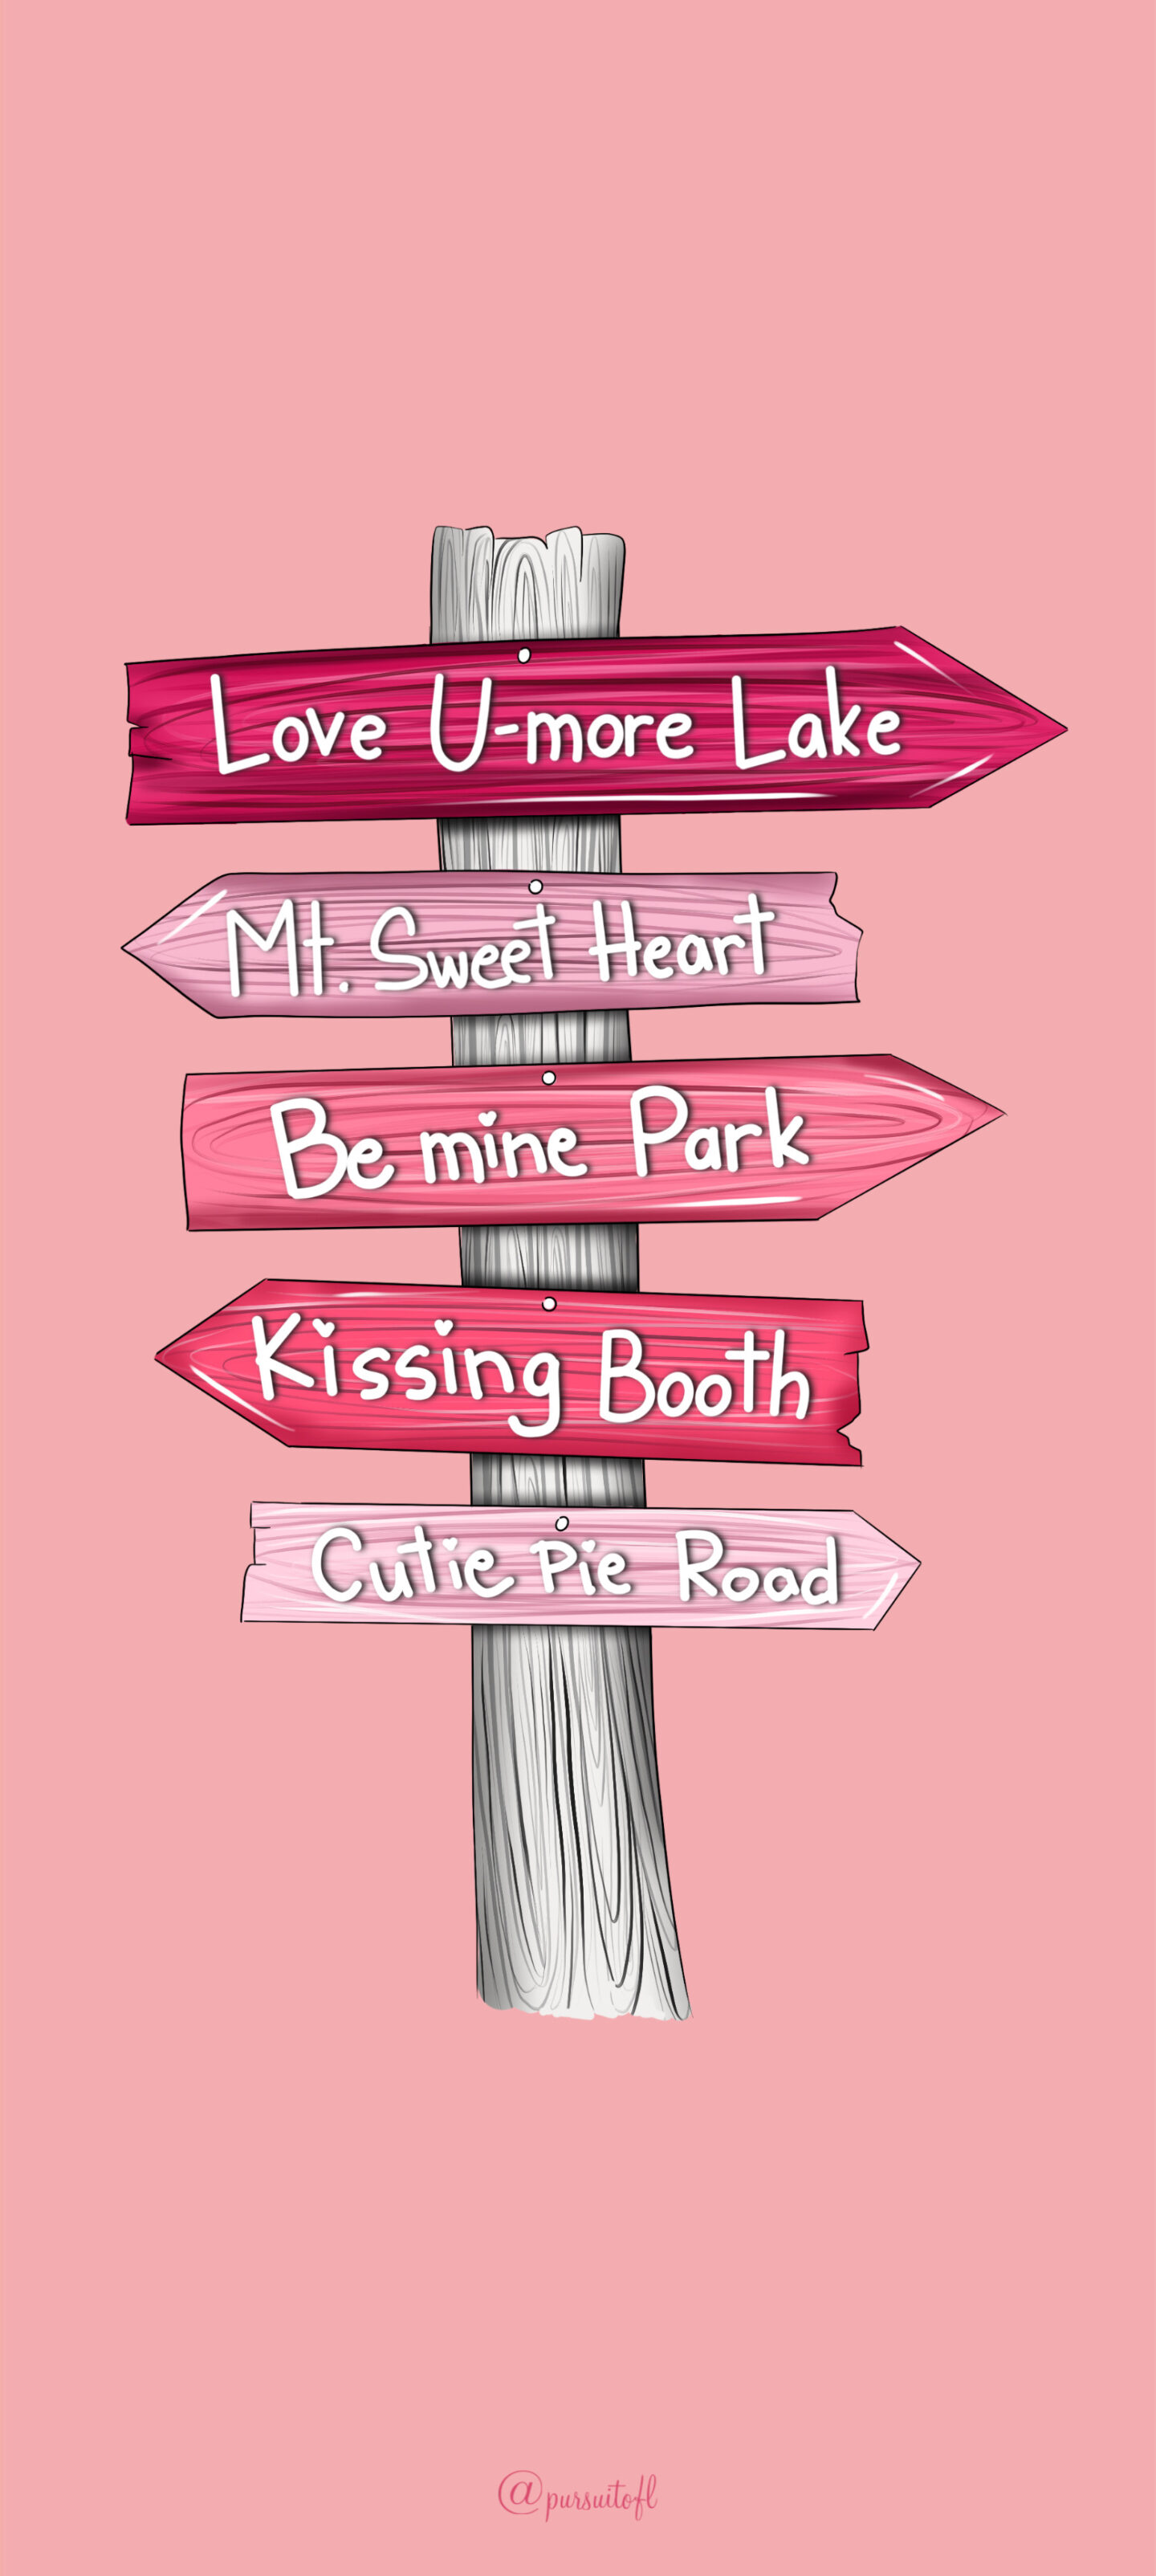 Pink Phone Wallpaper with Post with Valentine's Day Signs with text Love U-more Lake, Mt. Sweet Heart, Be mine Park, Kissing Booth, and Cutie Pie Road; Valentines' Day Wallpaper